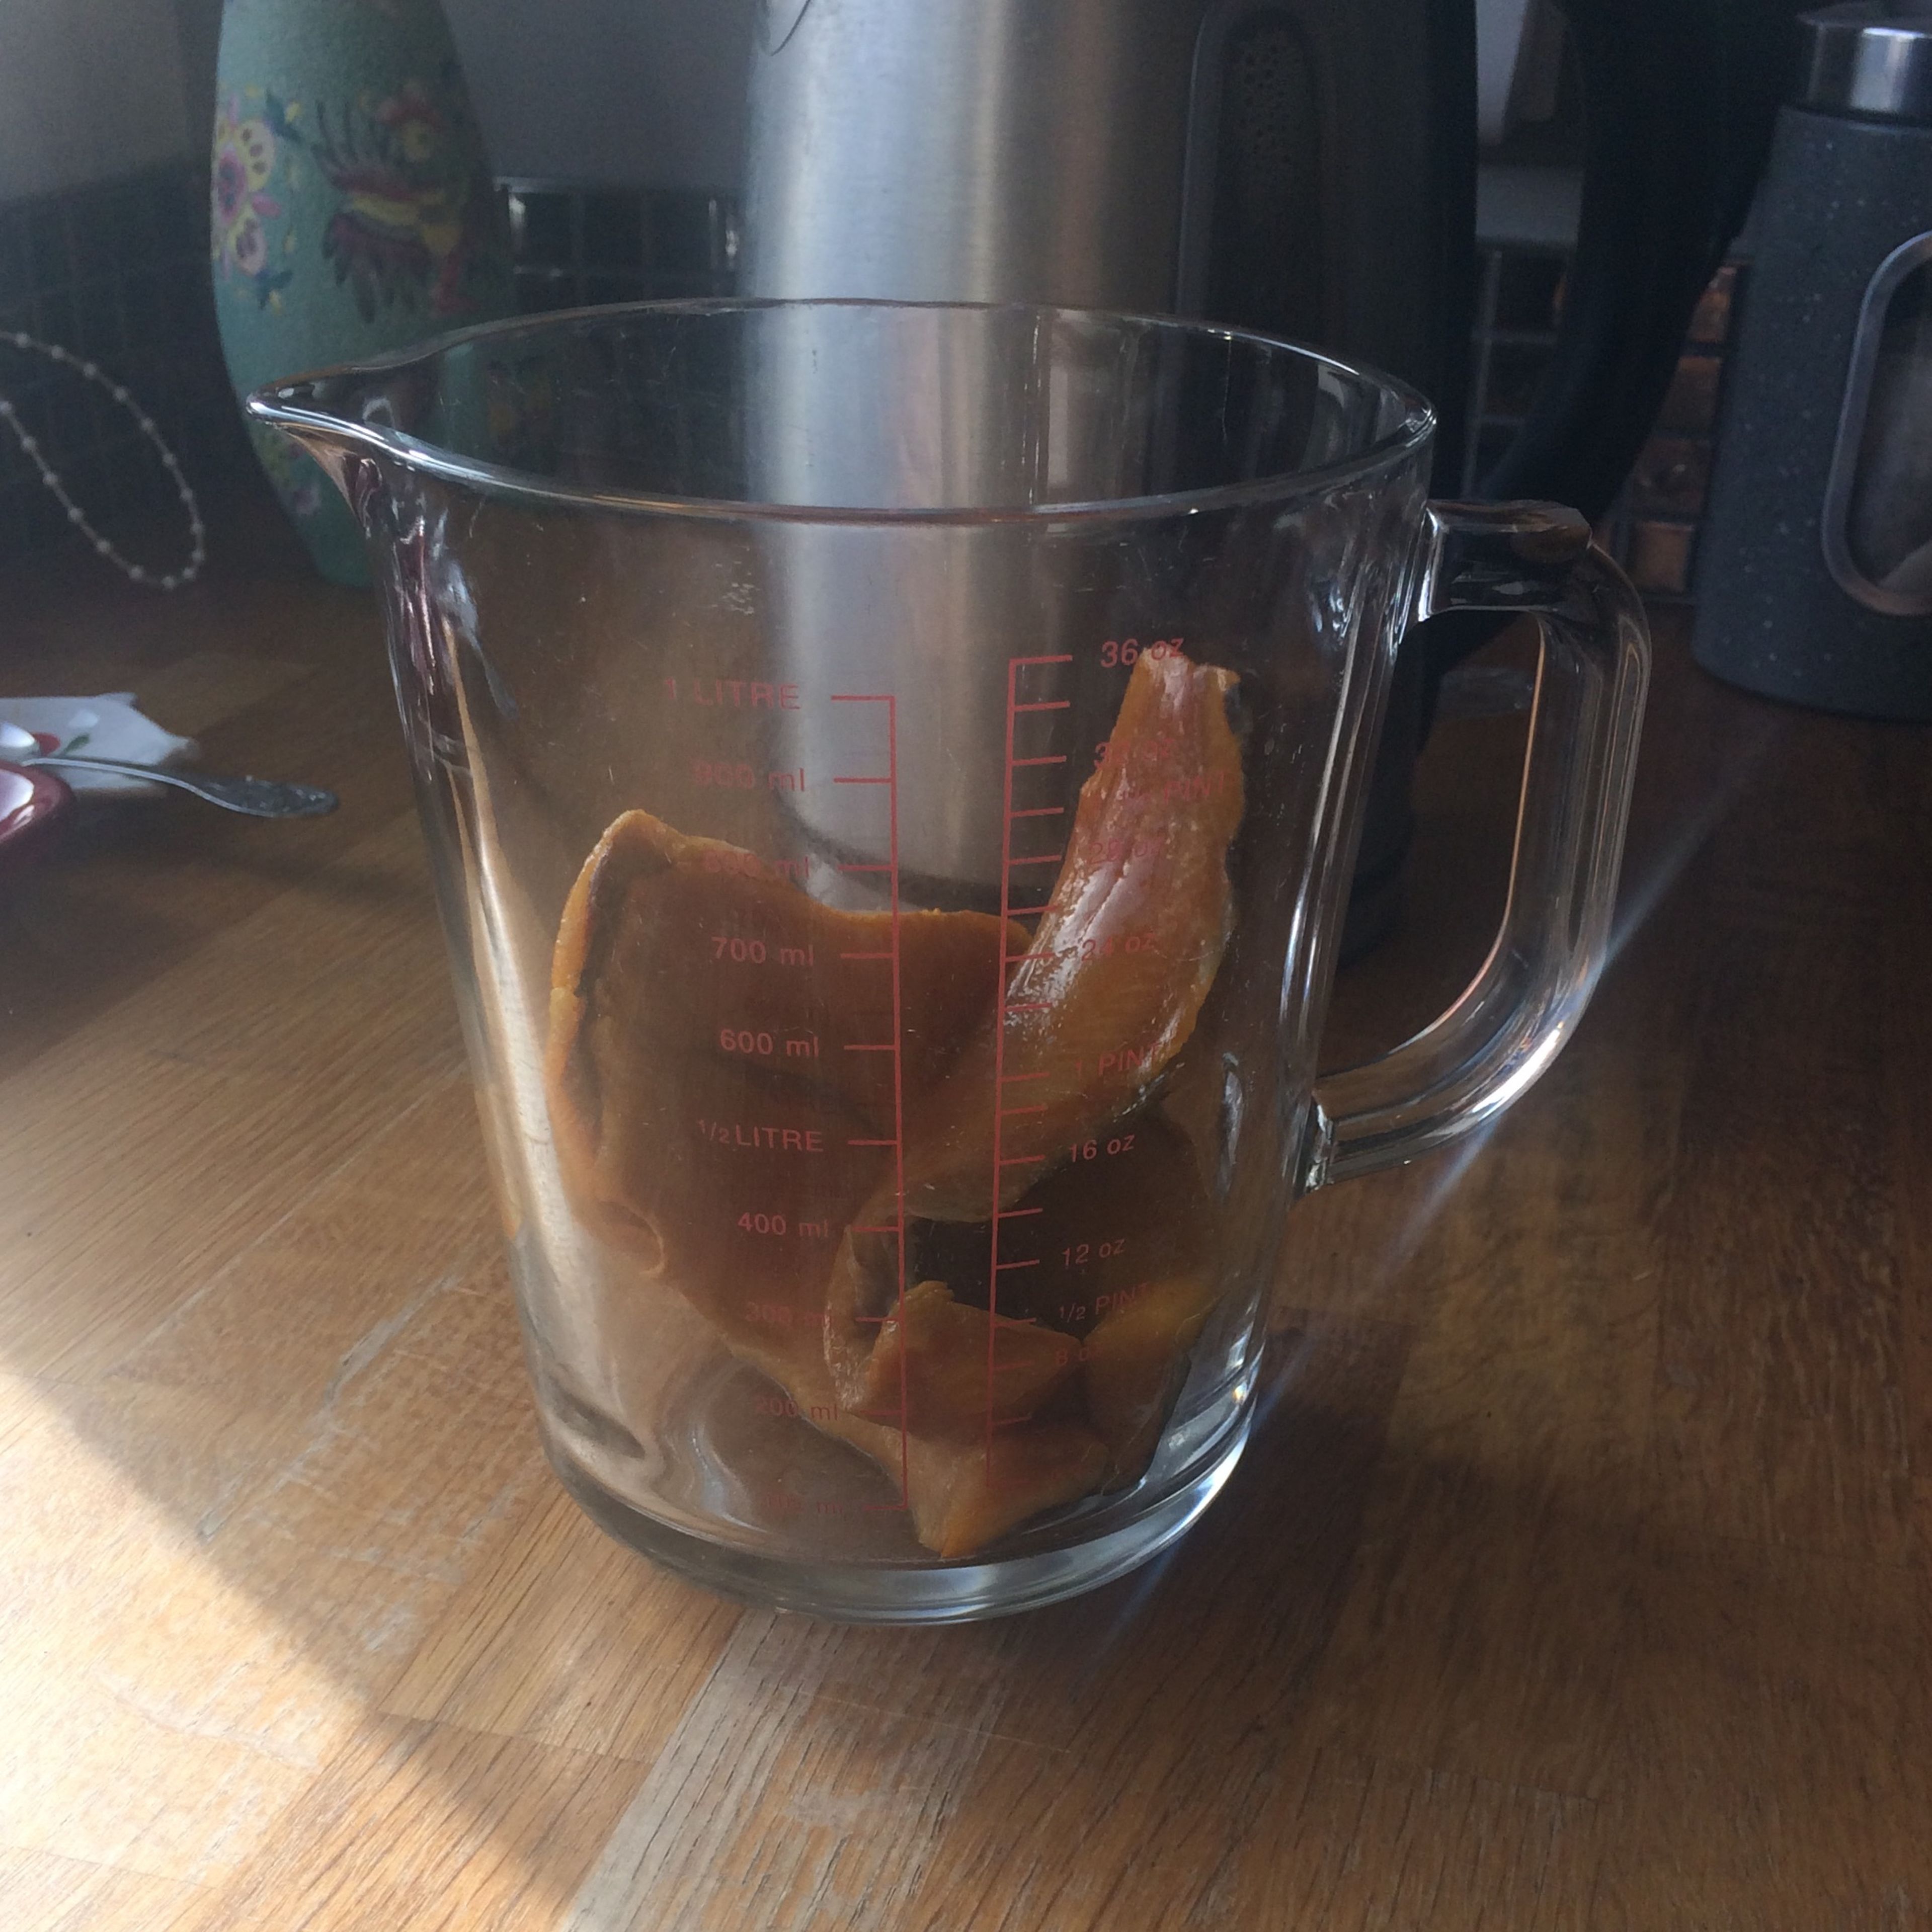 Cover kippers with boiling water then cover with a plate and leave to poach in the jug for 7 minutes